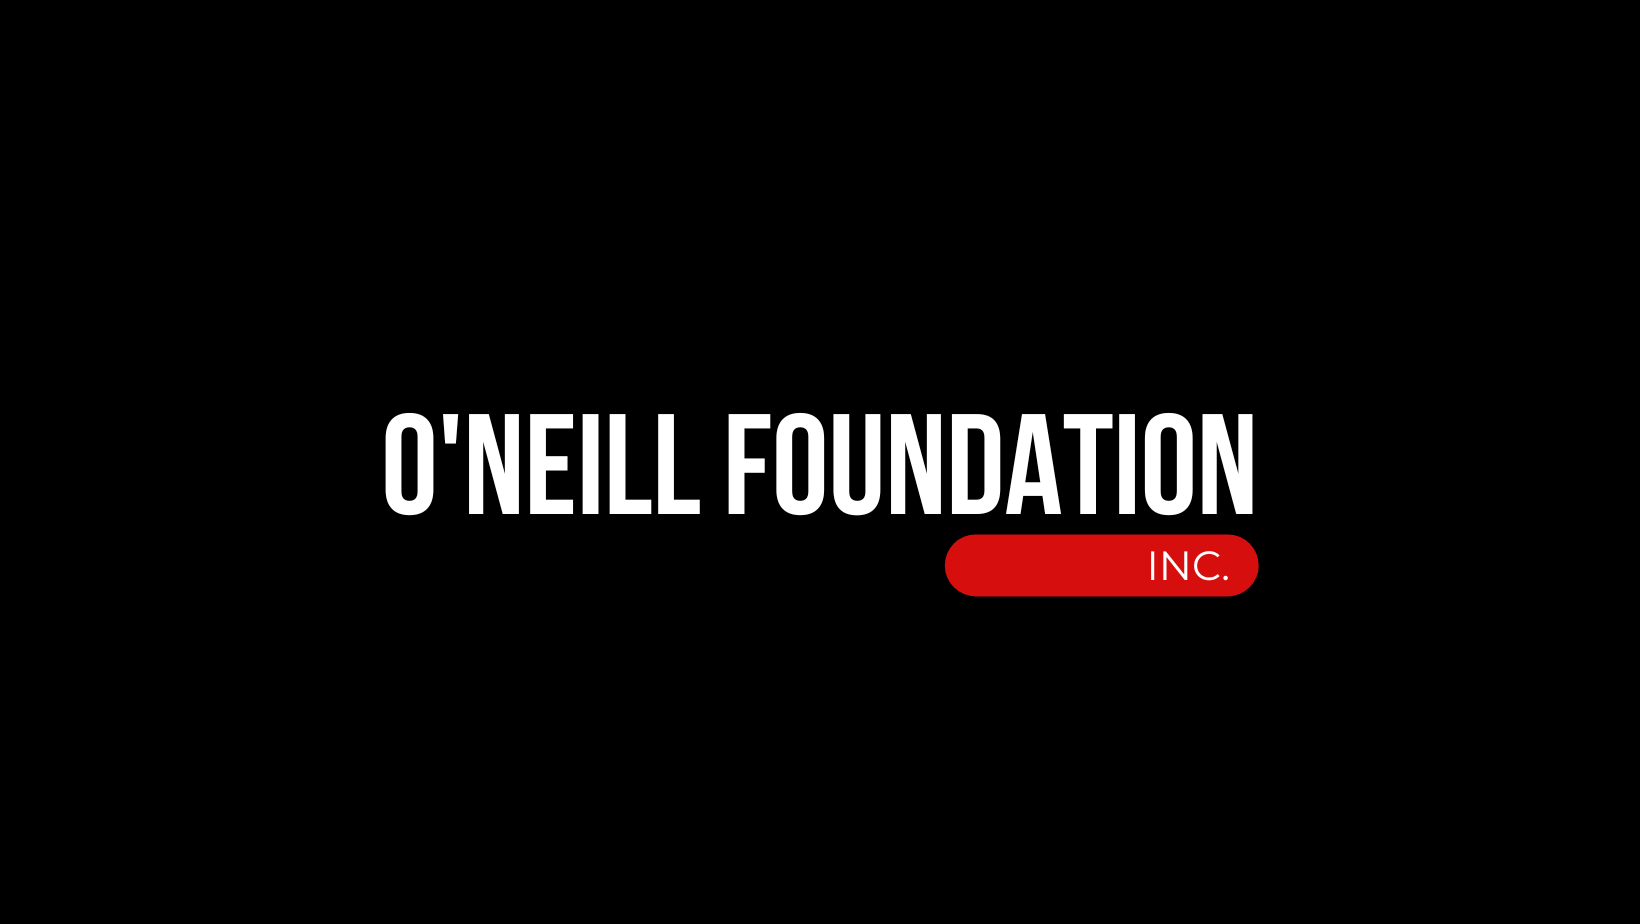 Distiller Round Table benefiting the O'Neill Foundation